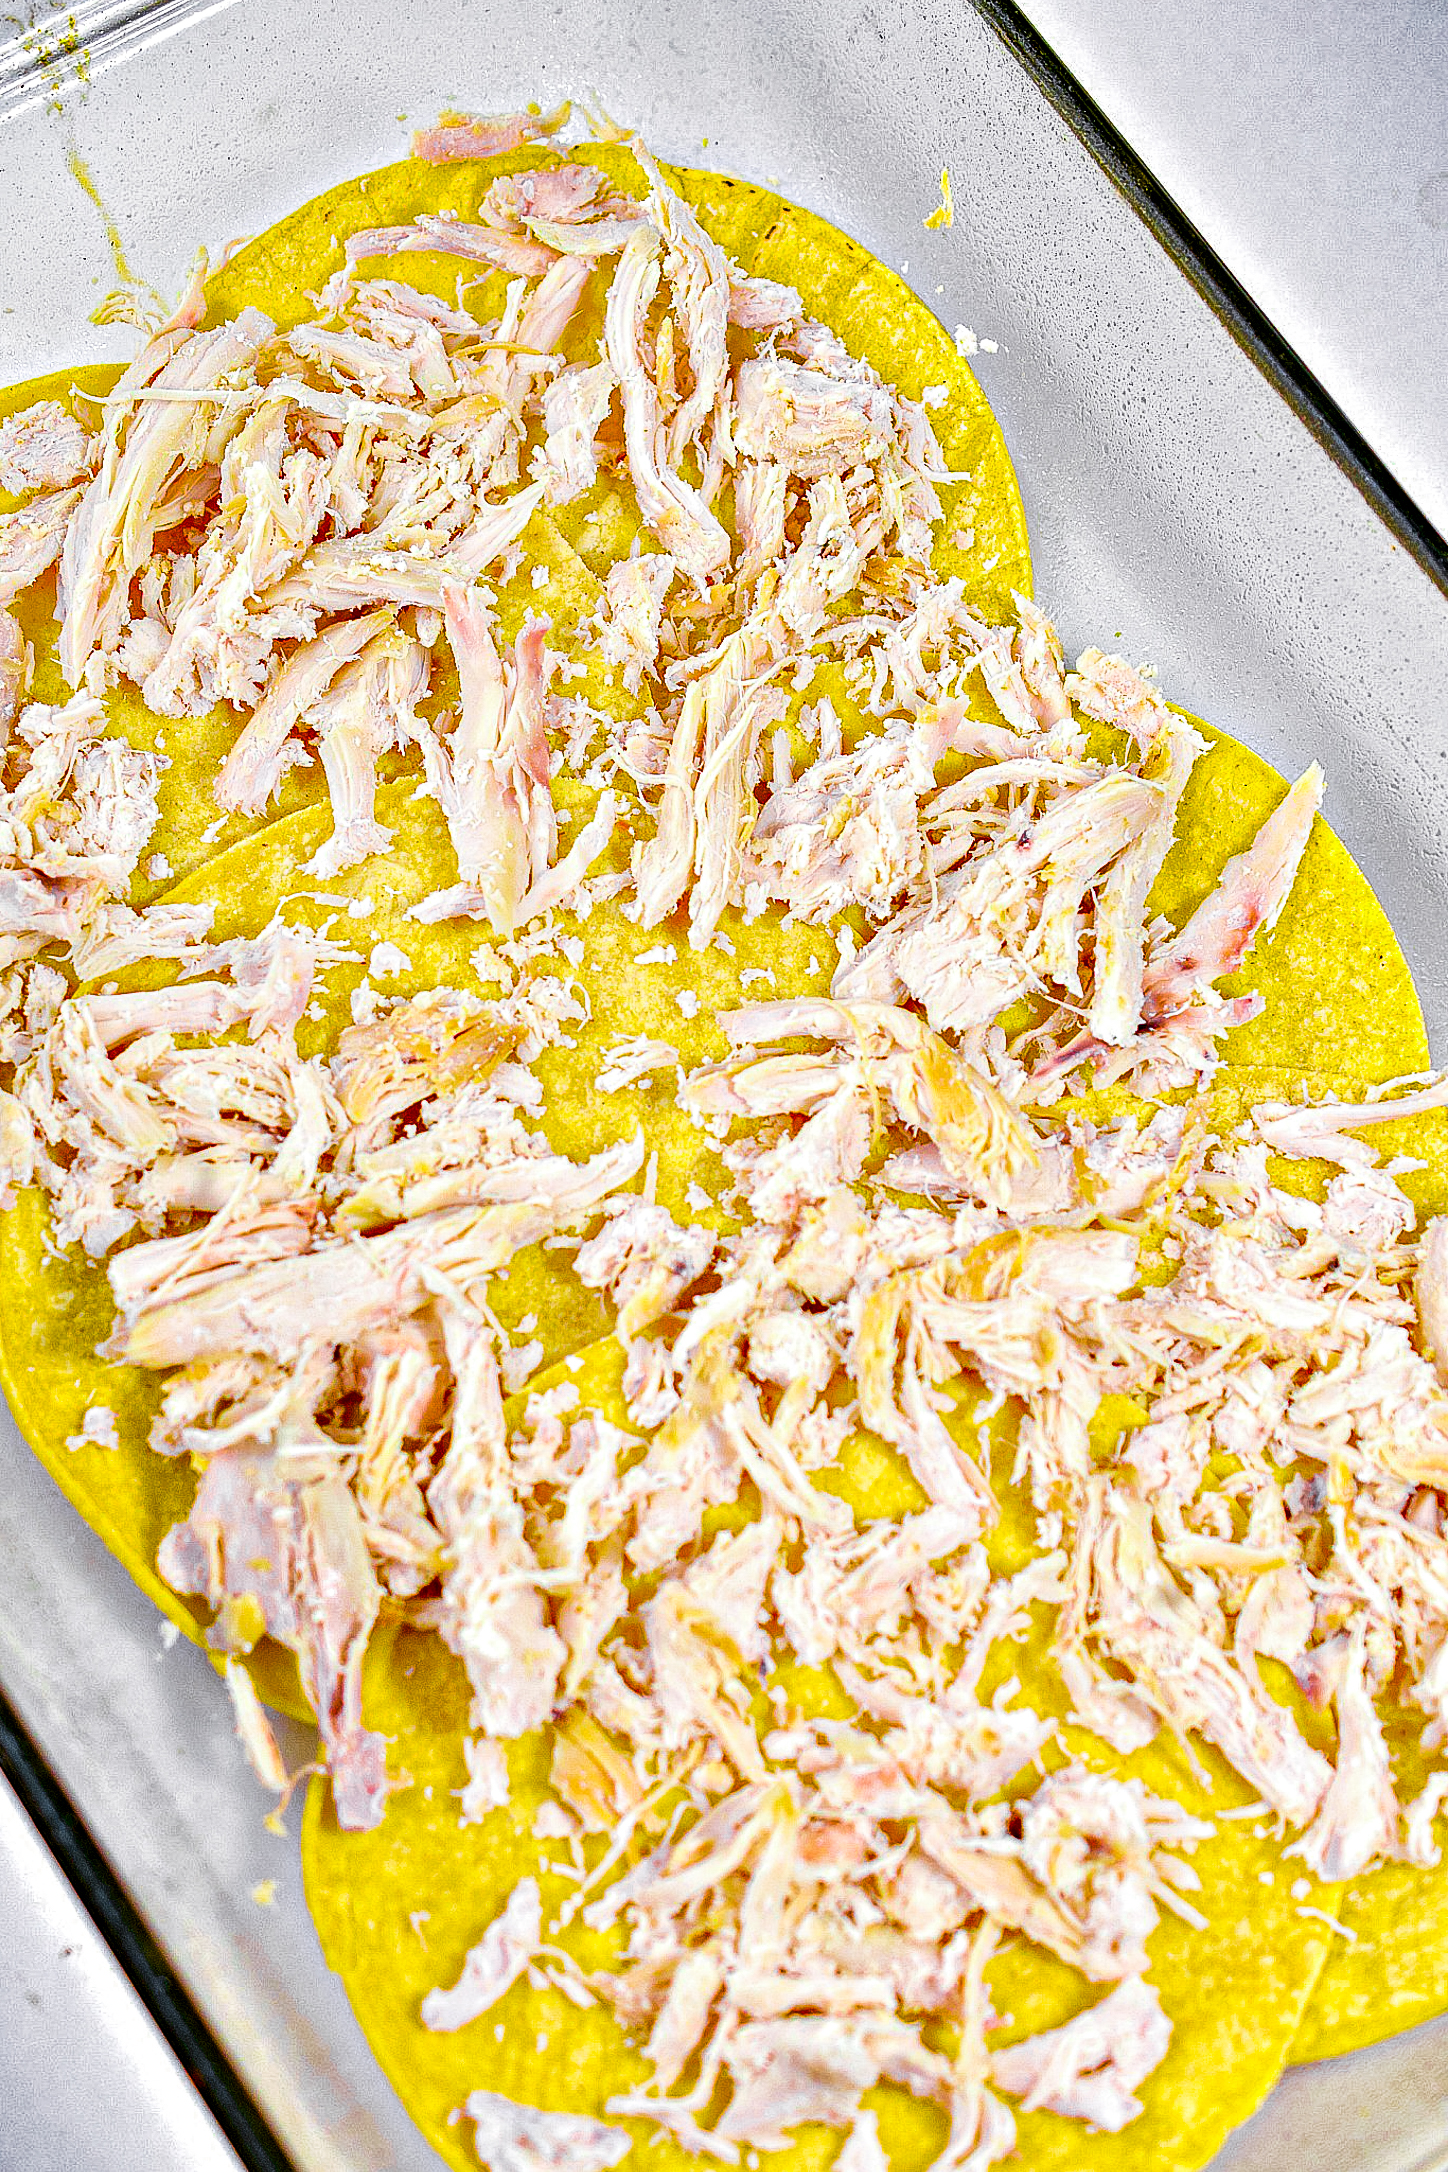 Place ½ of the chicken, then ½ of the sauce mixture, and a sprinkling of cheese in a layer on top of the tortillas.